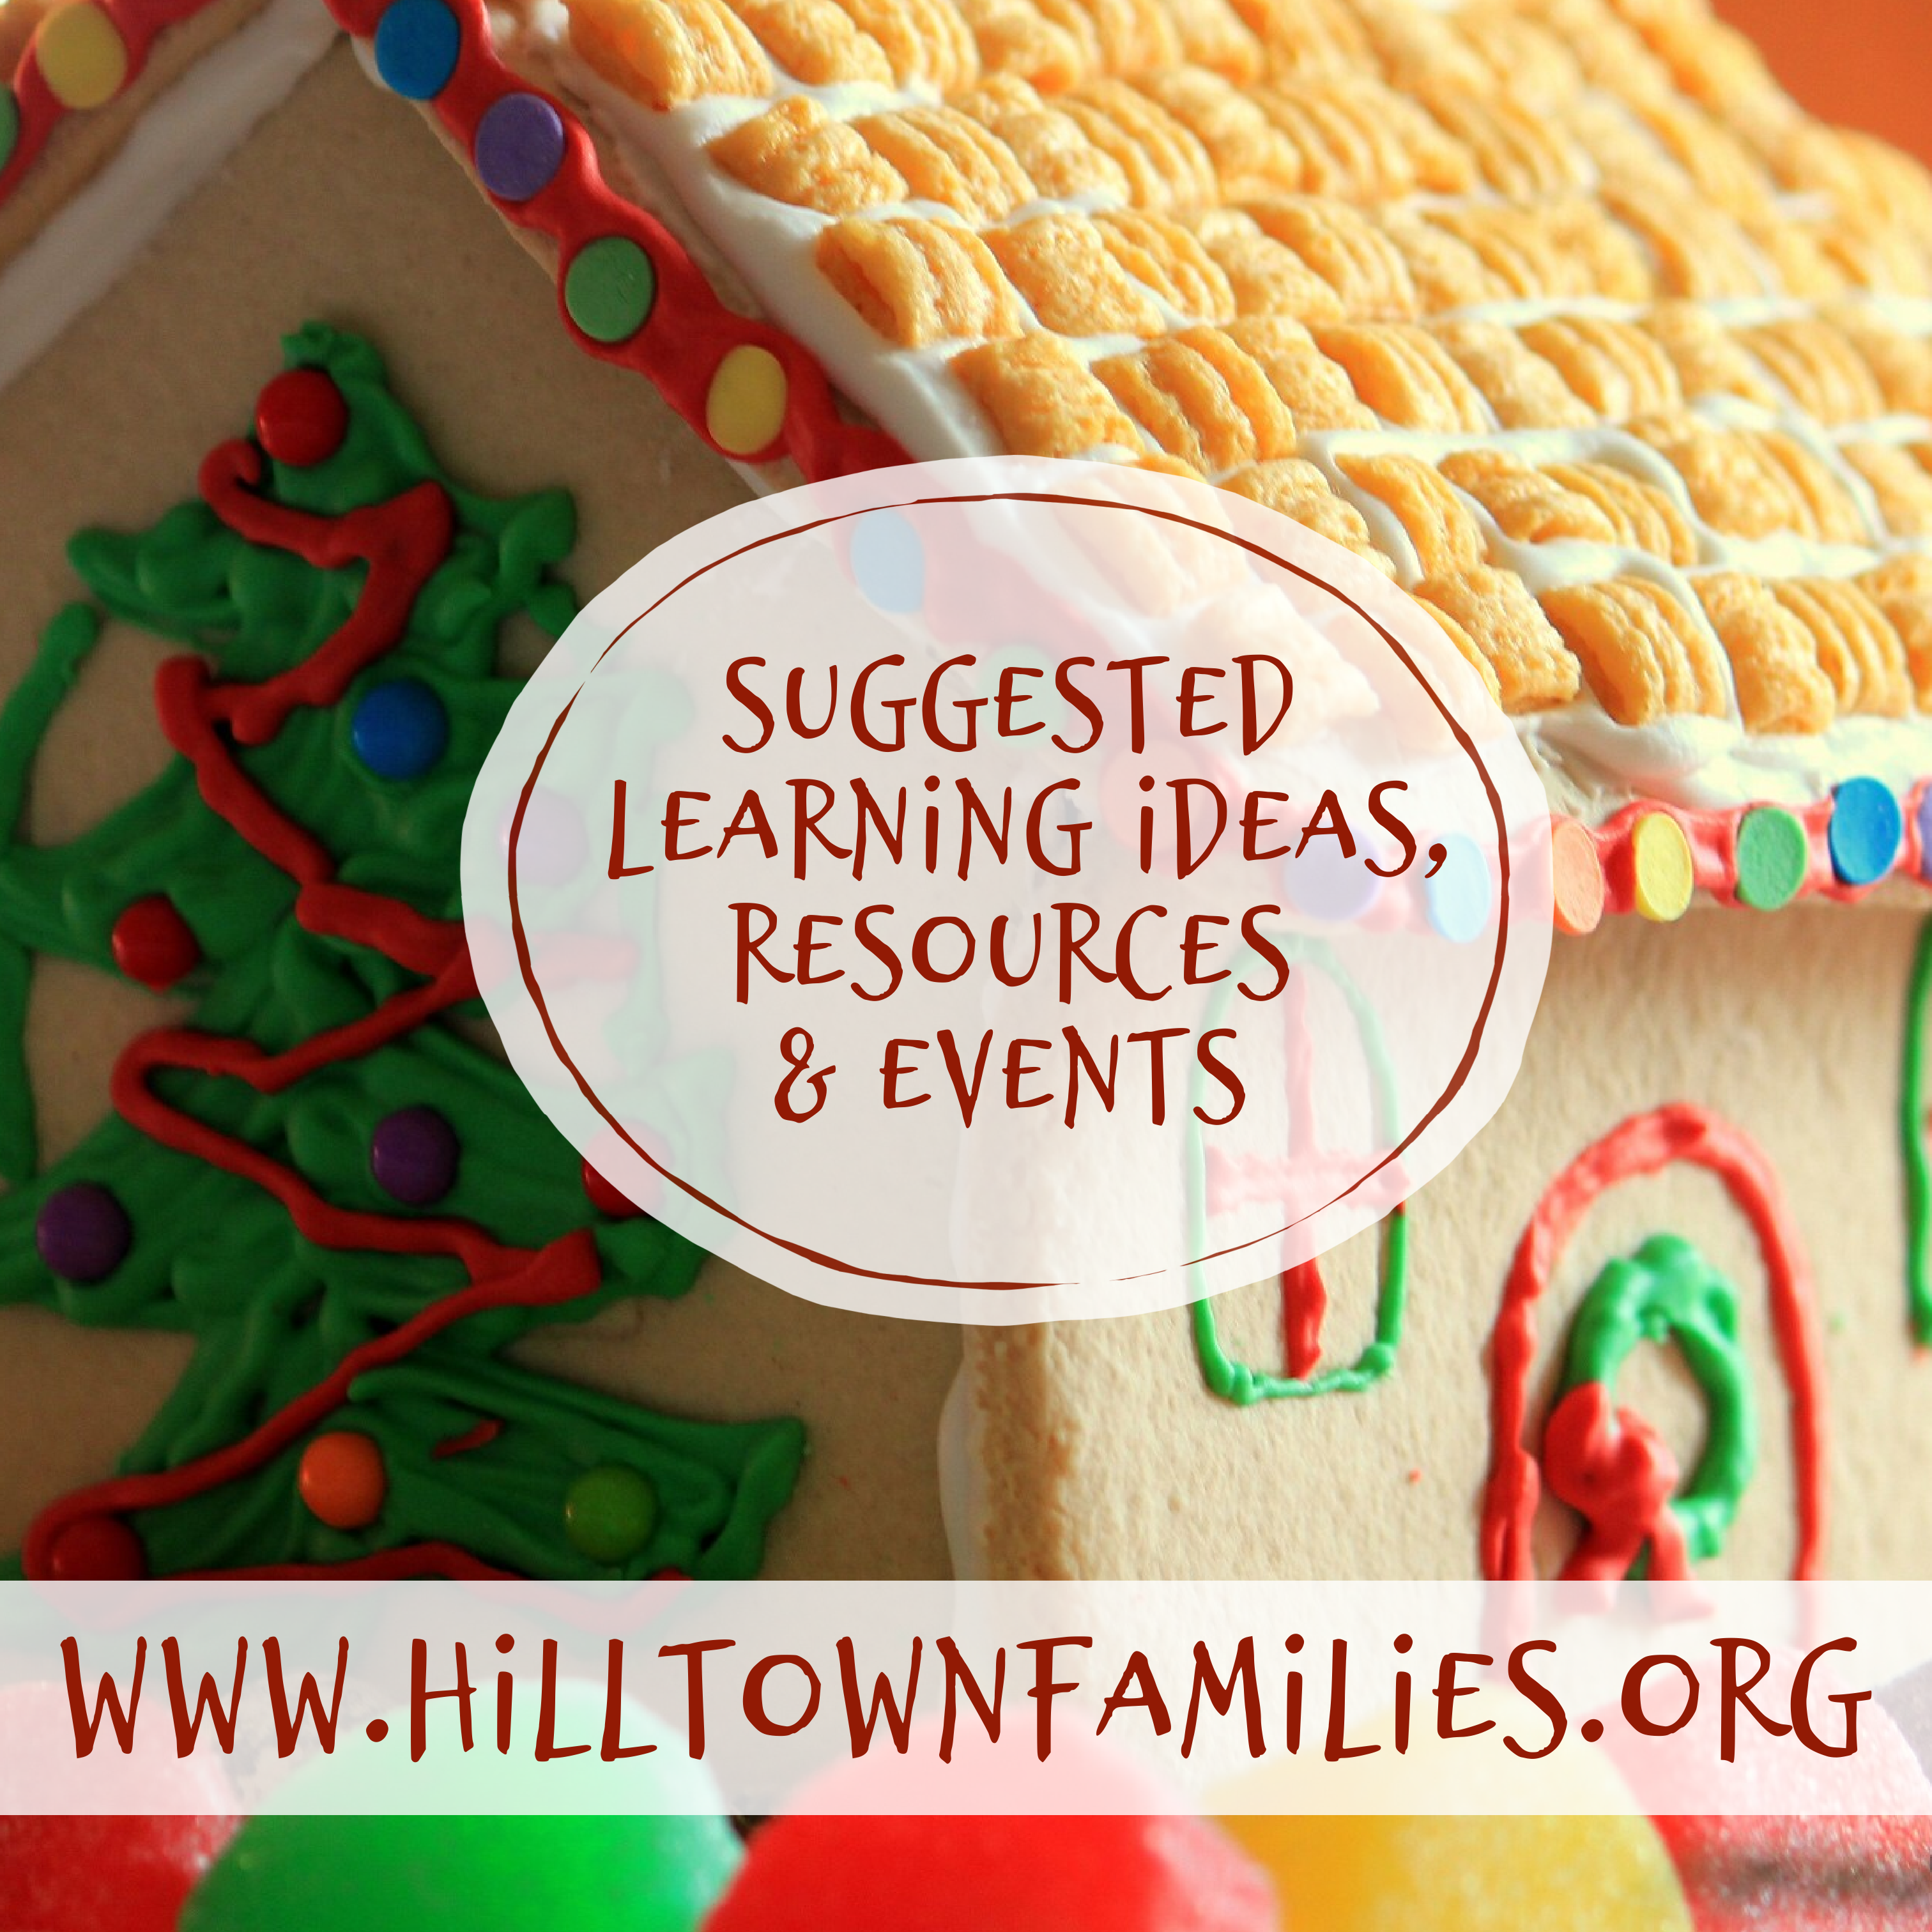 Last weekend of November is full of community-based learning opportunities and  family events for holiday fun + memories.